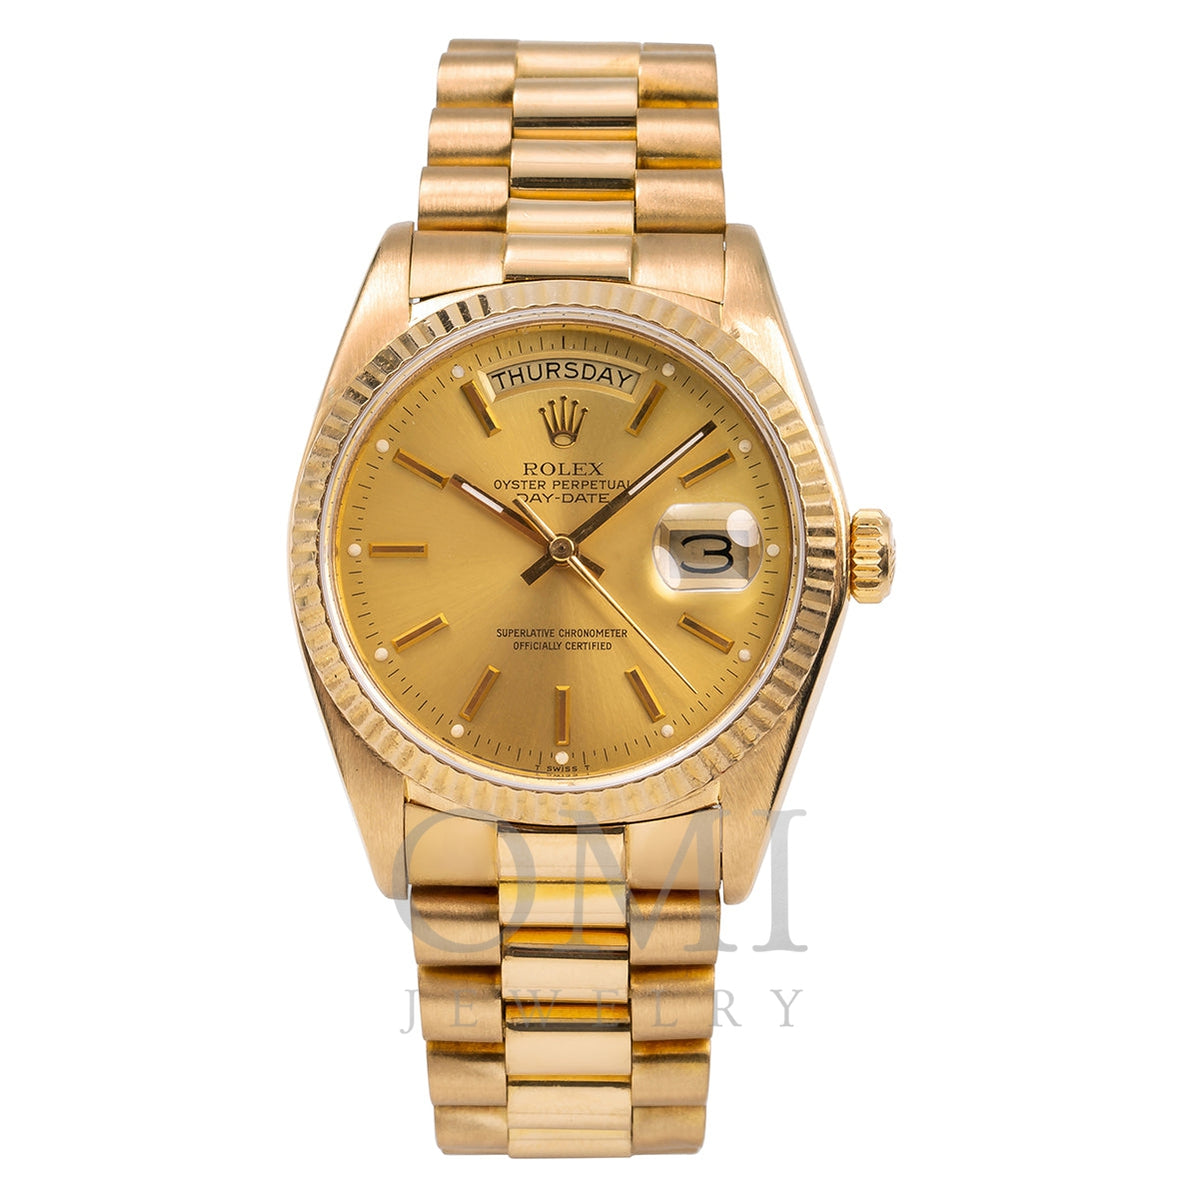 Eller semafor Megalopolis 18K Yellow Gold Rolex Day-Date 18038 36mm Champagne Dial - OMI Jewelry